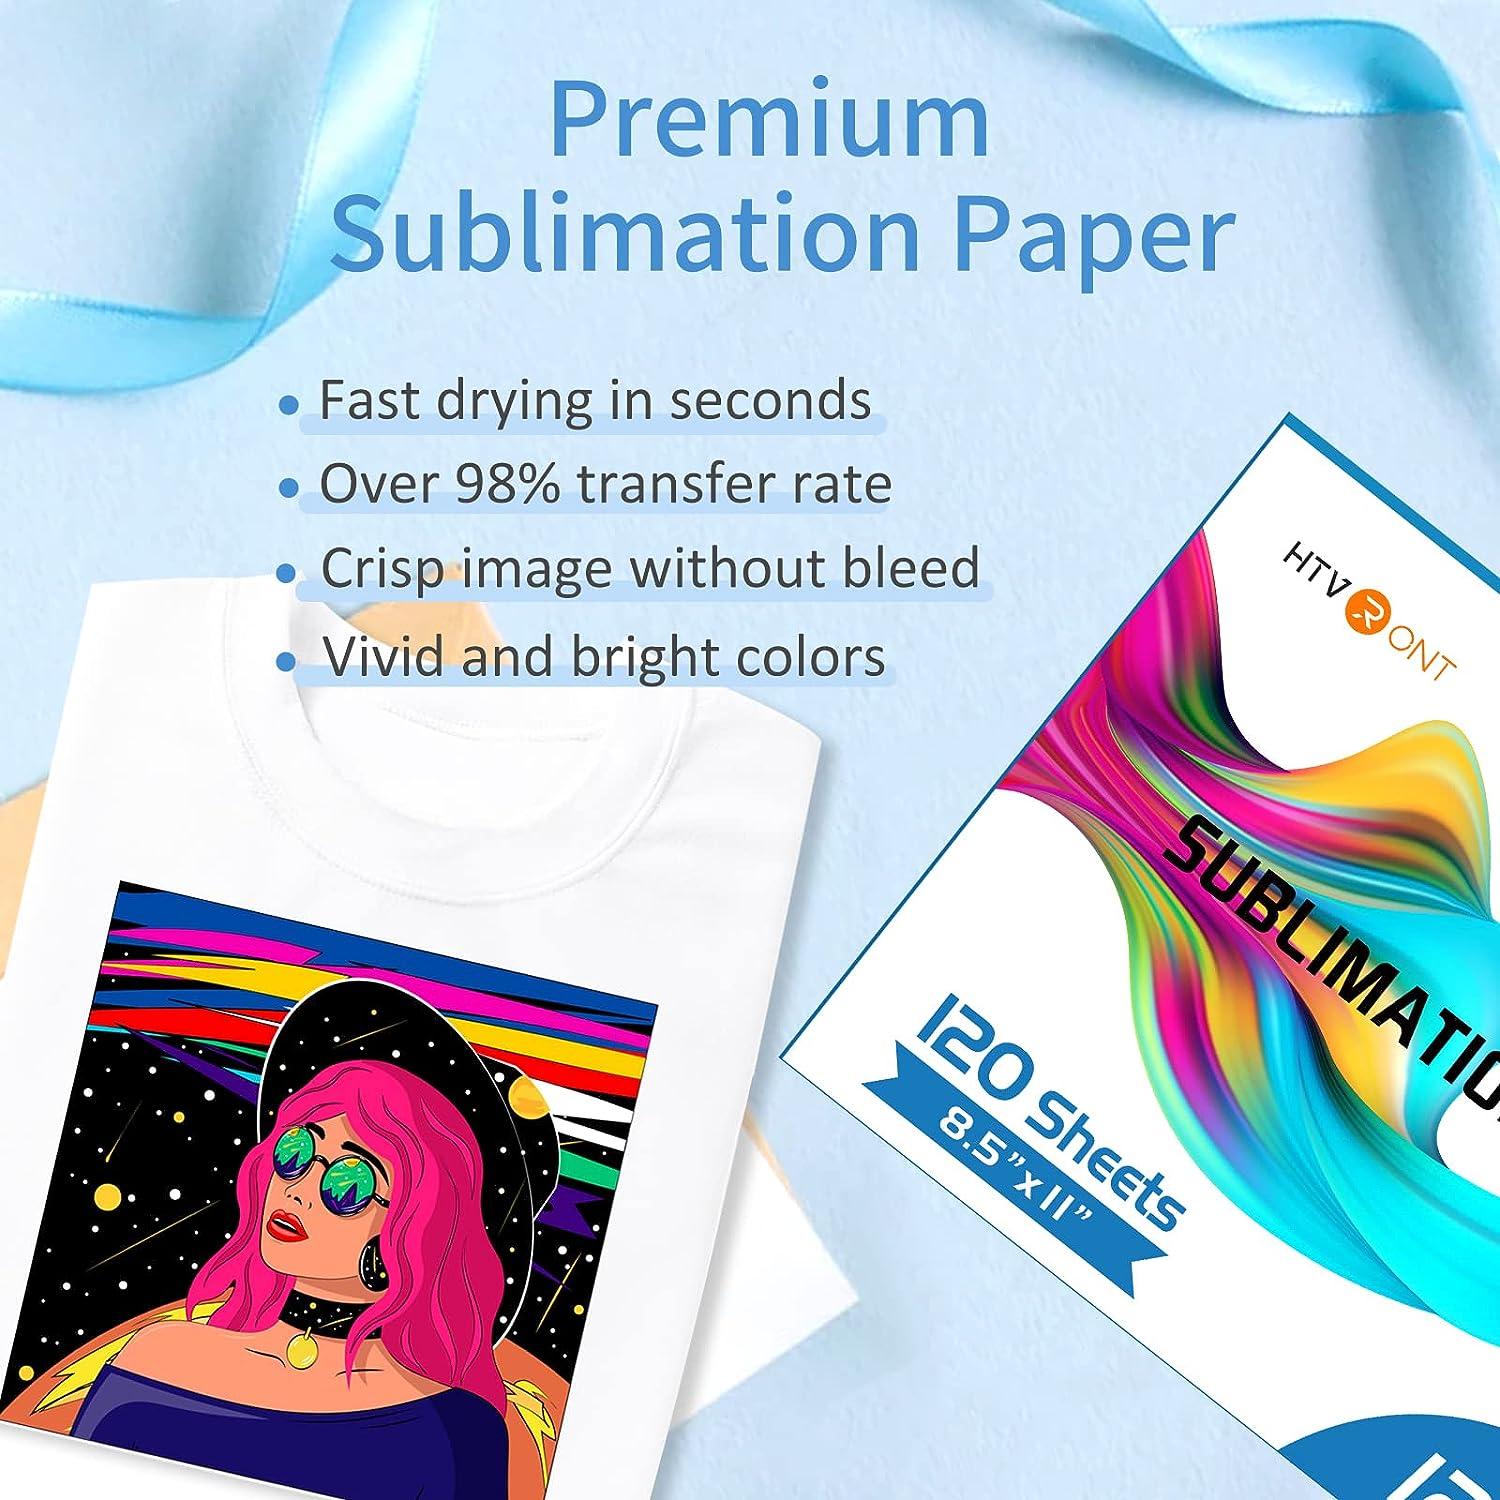 100 Sheets of 8.5 x 11 Inches Sublimation Paper Malaysia